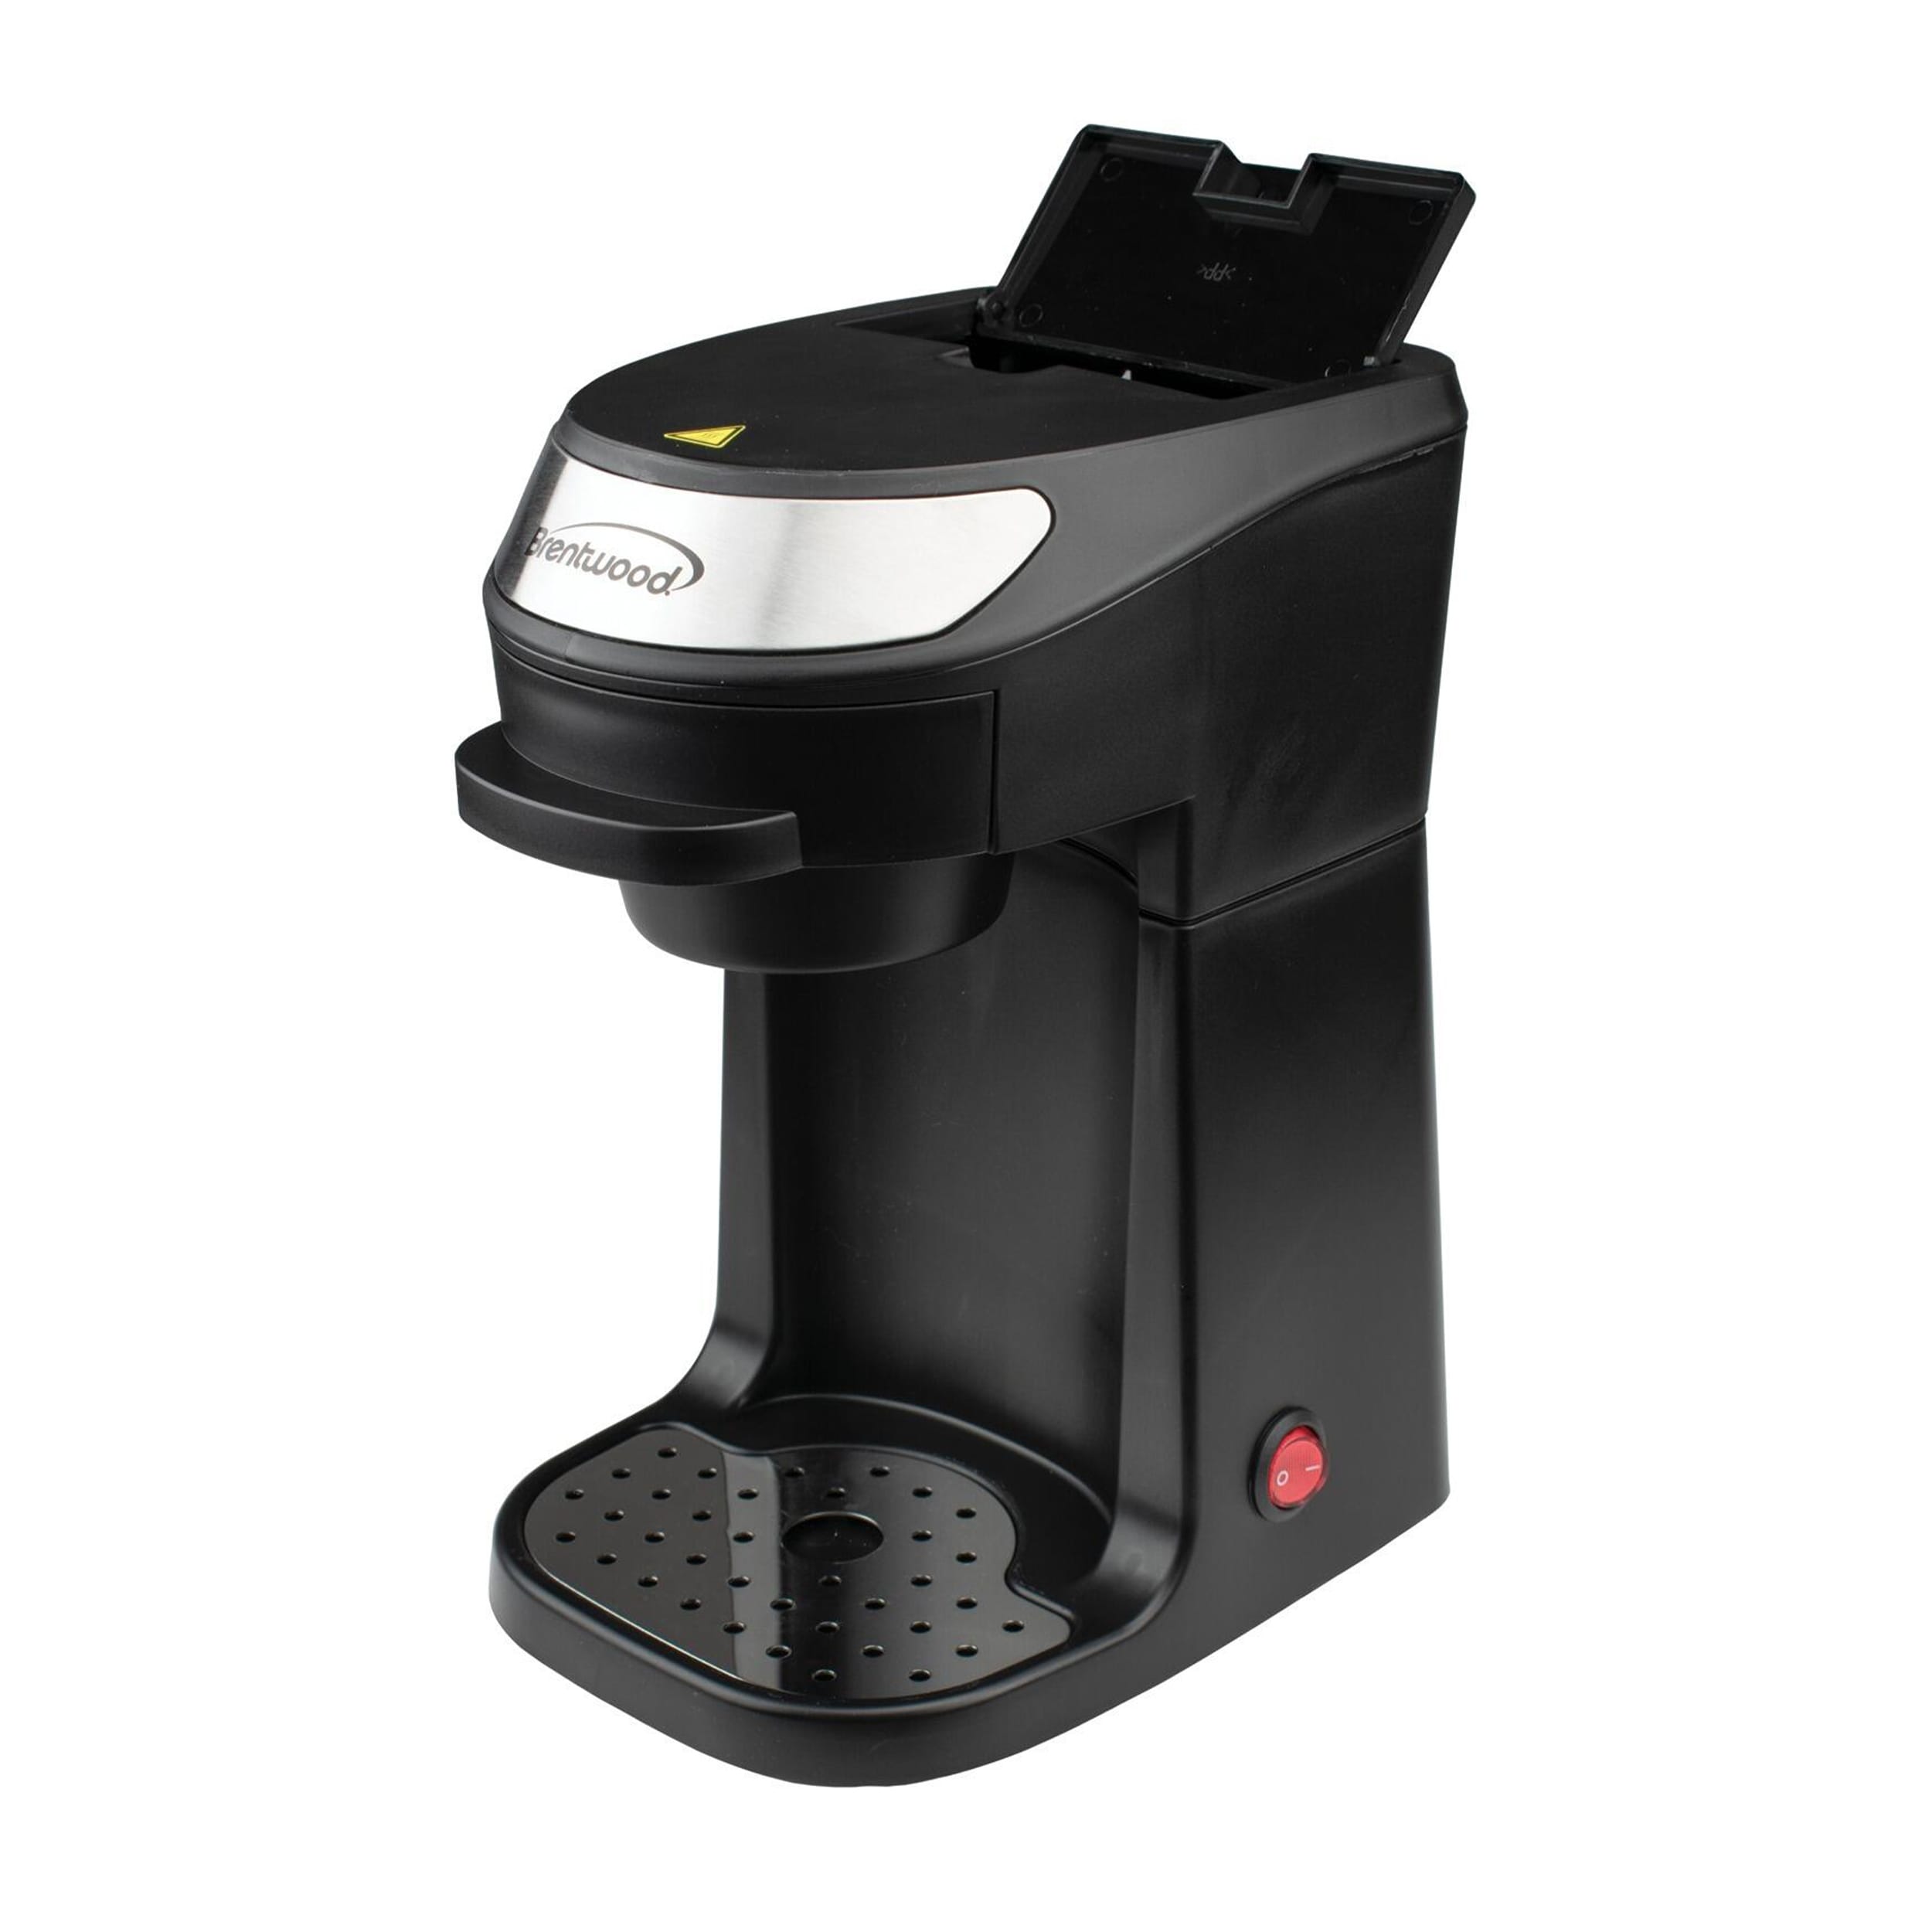 https://ak1.ostkcdn.com/images/products/is/images/direct/11274dc08757459faca159389f1b39b00e2cf4cb/Brentwood-Single-Serve-Coffee-Maker-in-Black-with-Mug.jpg